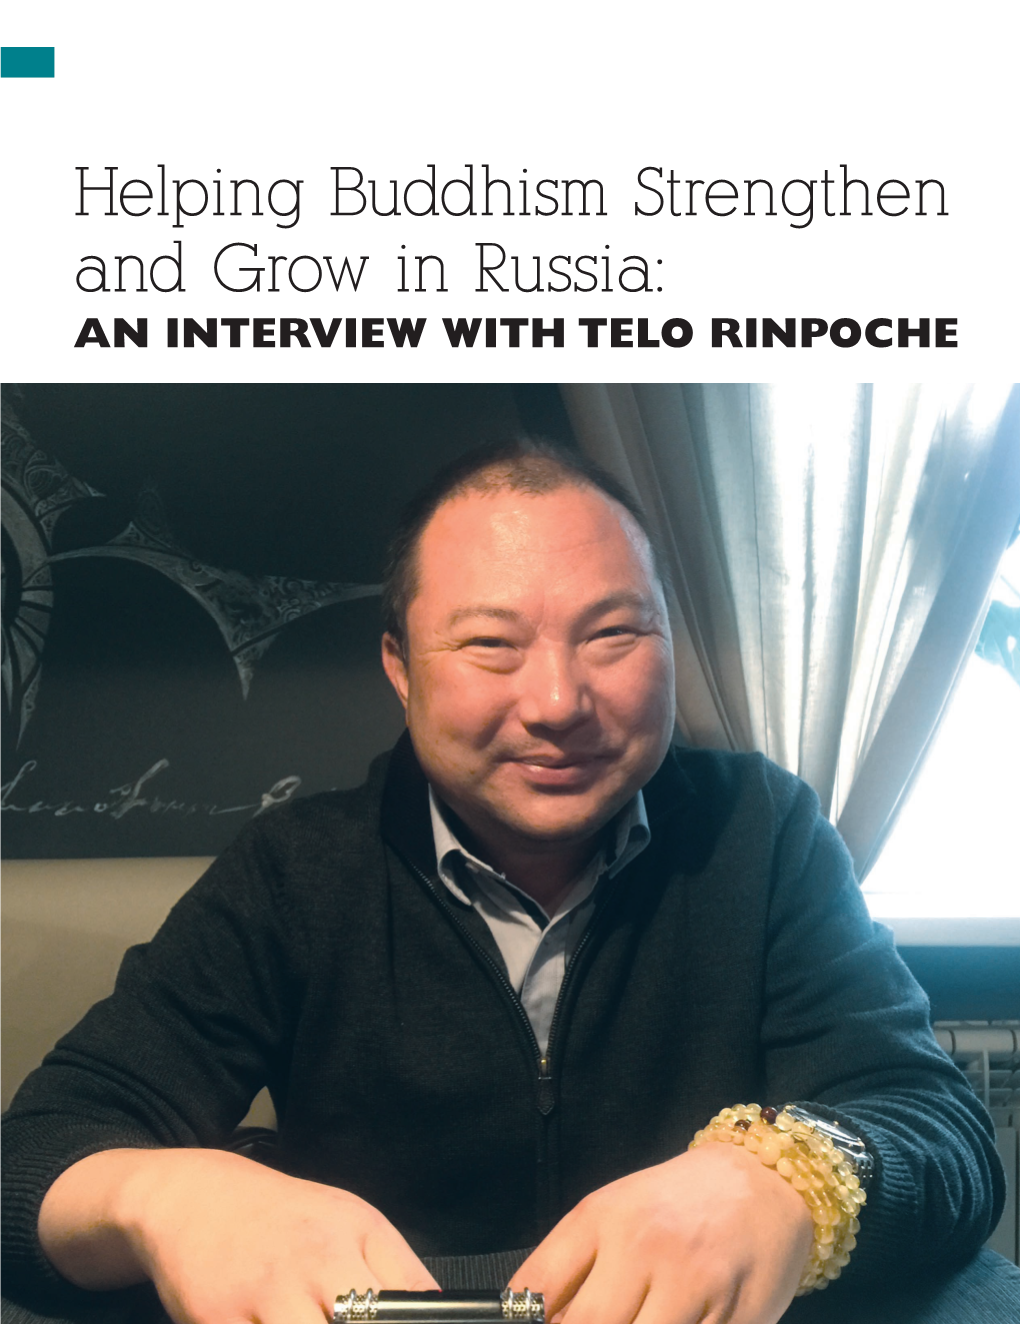 Helping Buddhism Strengthen and Grow in Russia: an INTERVIEW with TELO RINPOCHE